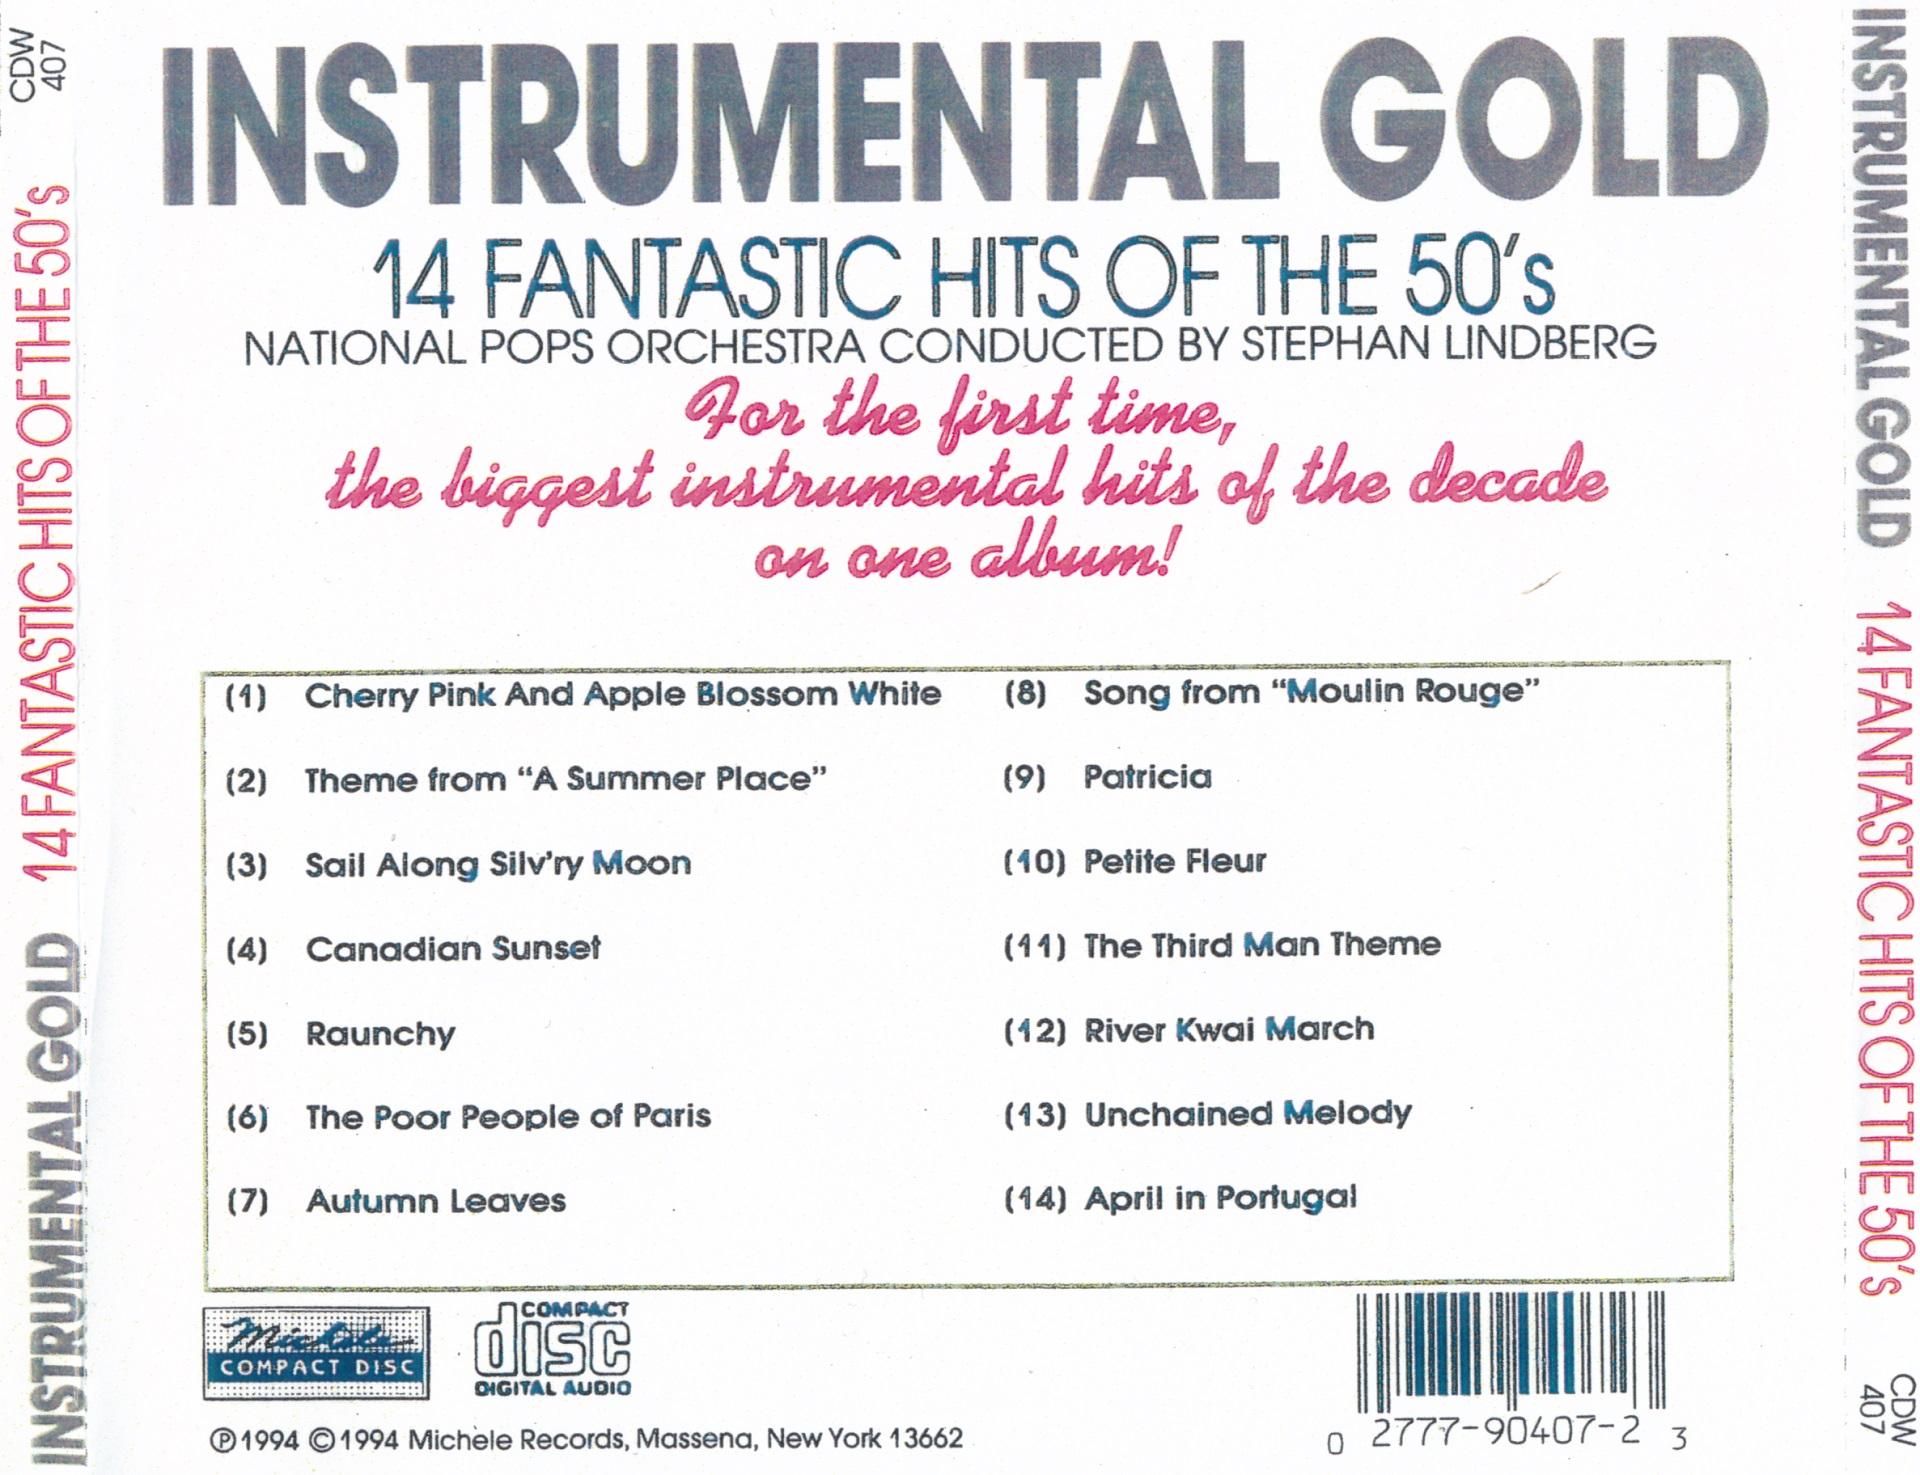 London Pops Orchestra And Ensemble - Instrumental GOLD- 14 Fantastic Hits of the 50's (1994)